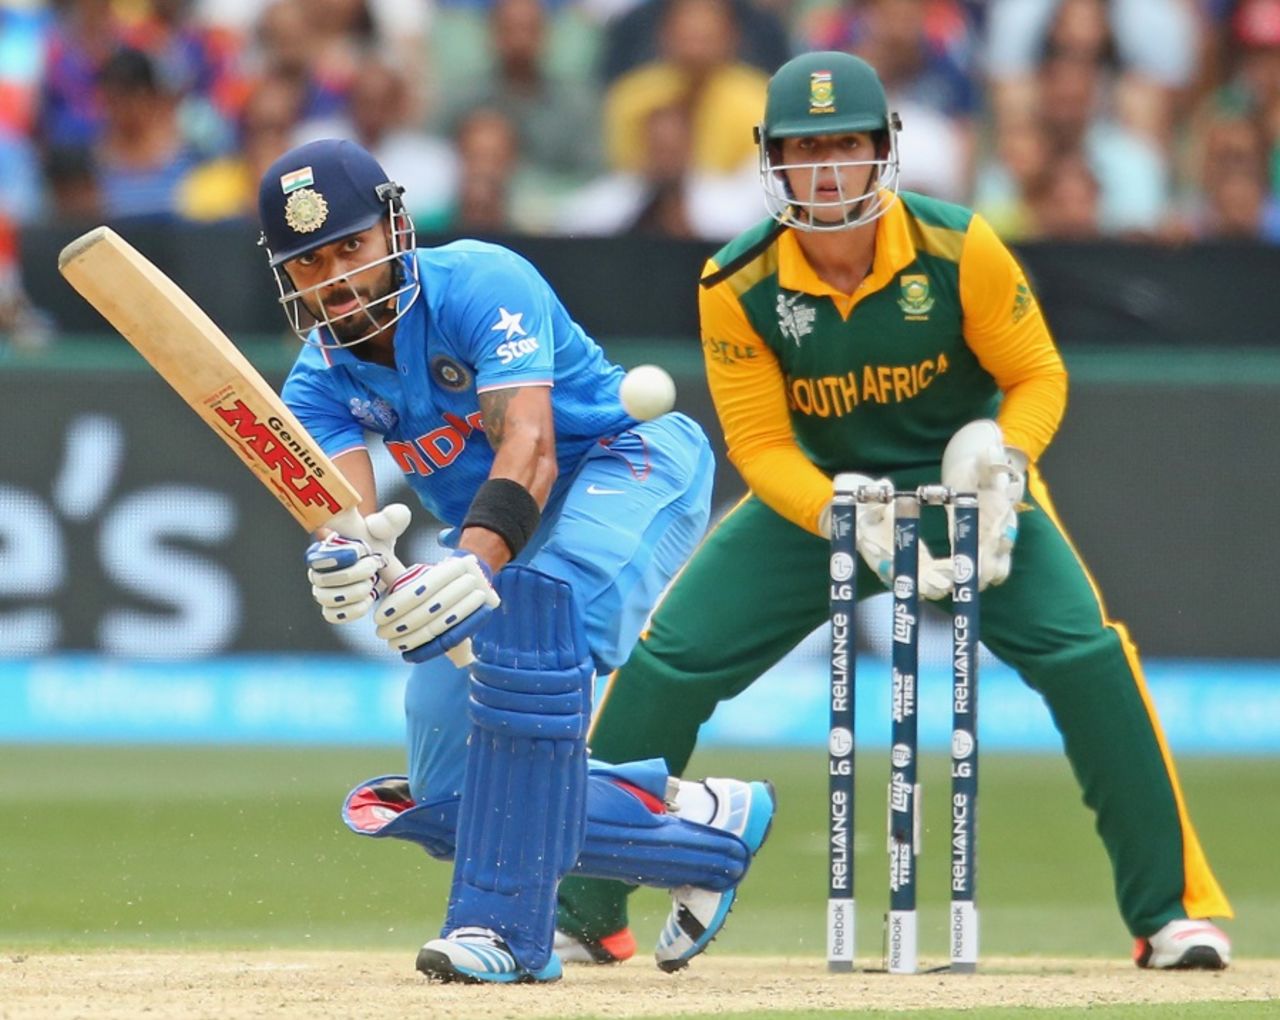 Virat Kohli nudges the ball to the leg side, India v South Africa, World Cup 2015, Group B, Melbourne, February 22, 2015